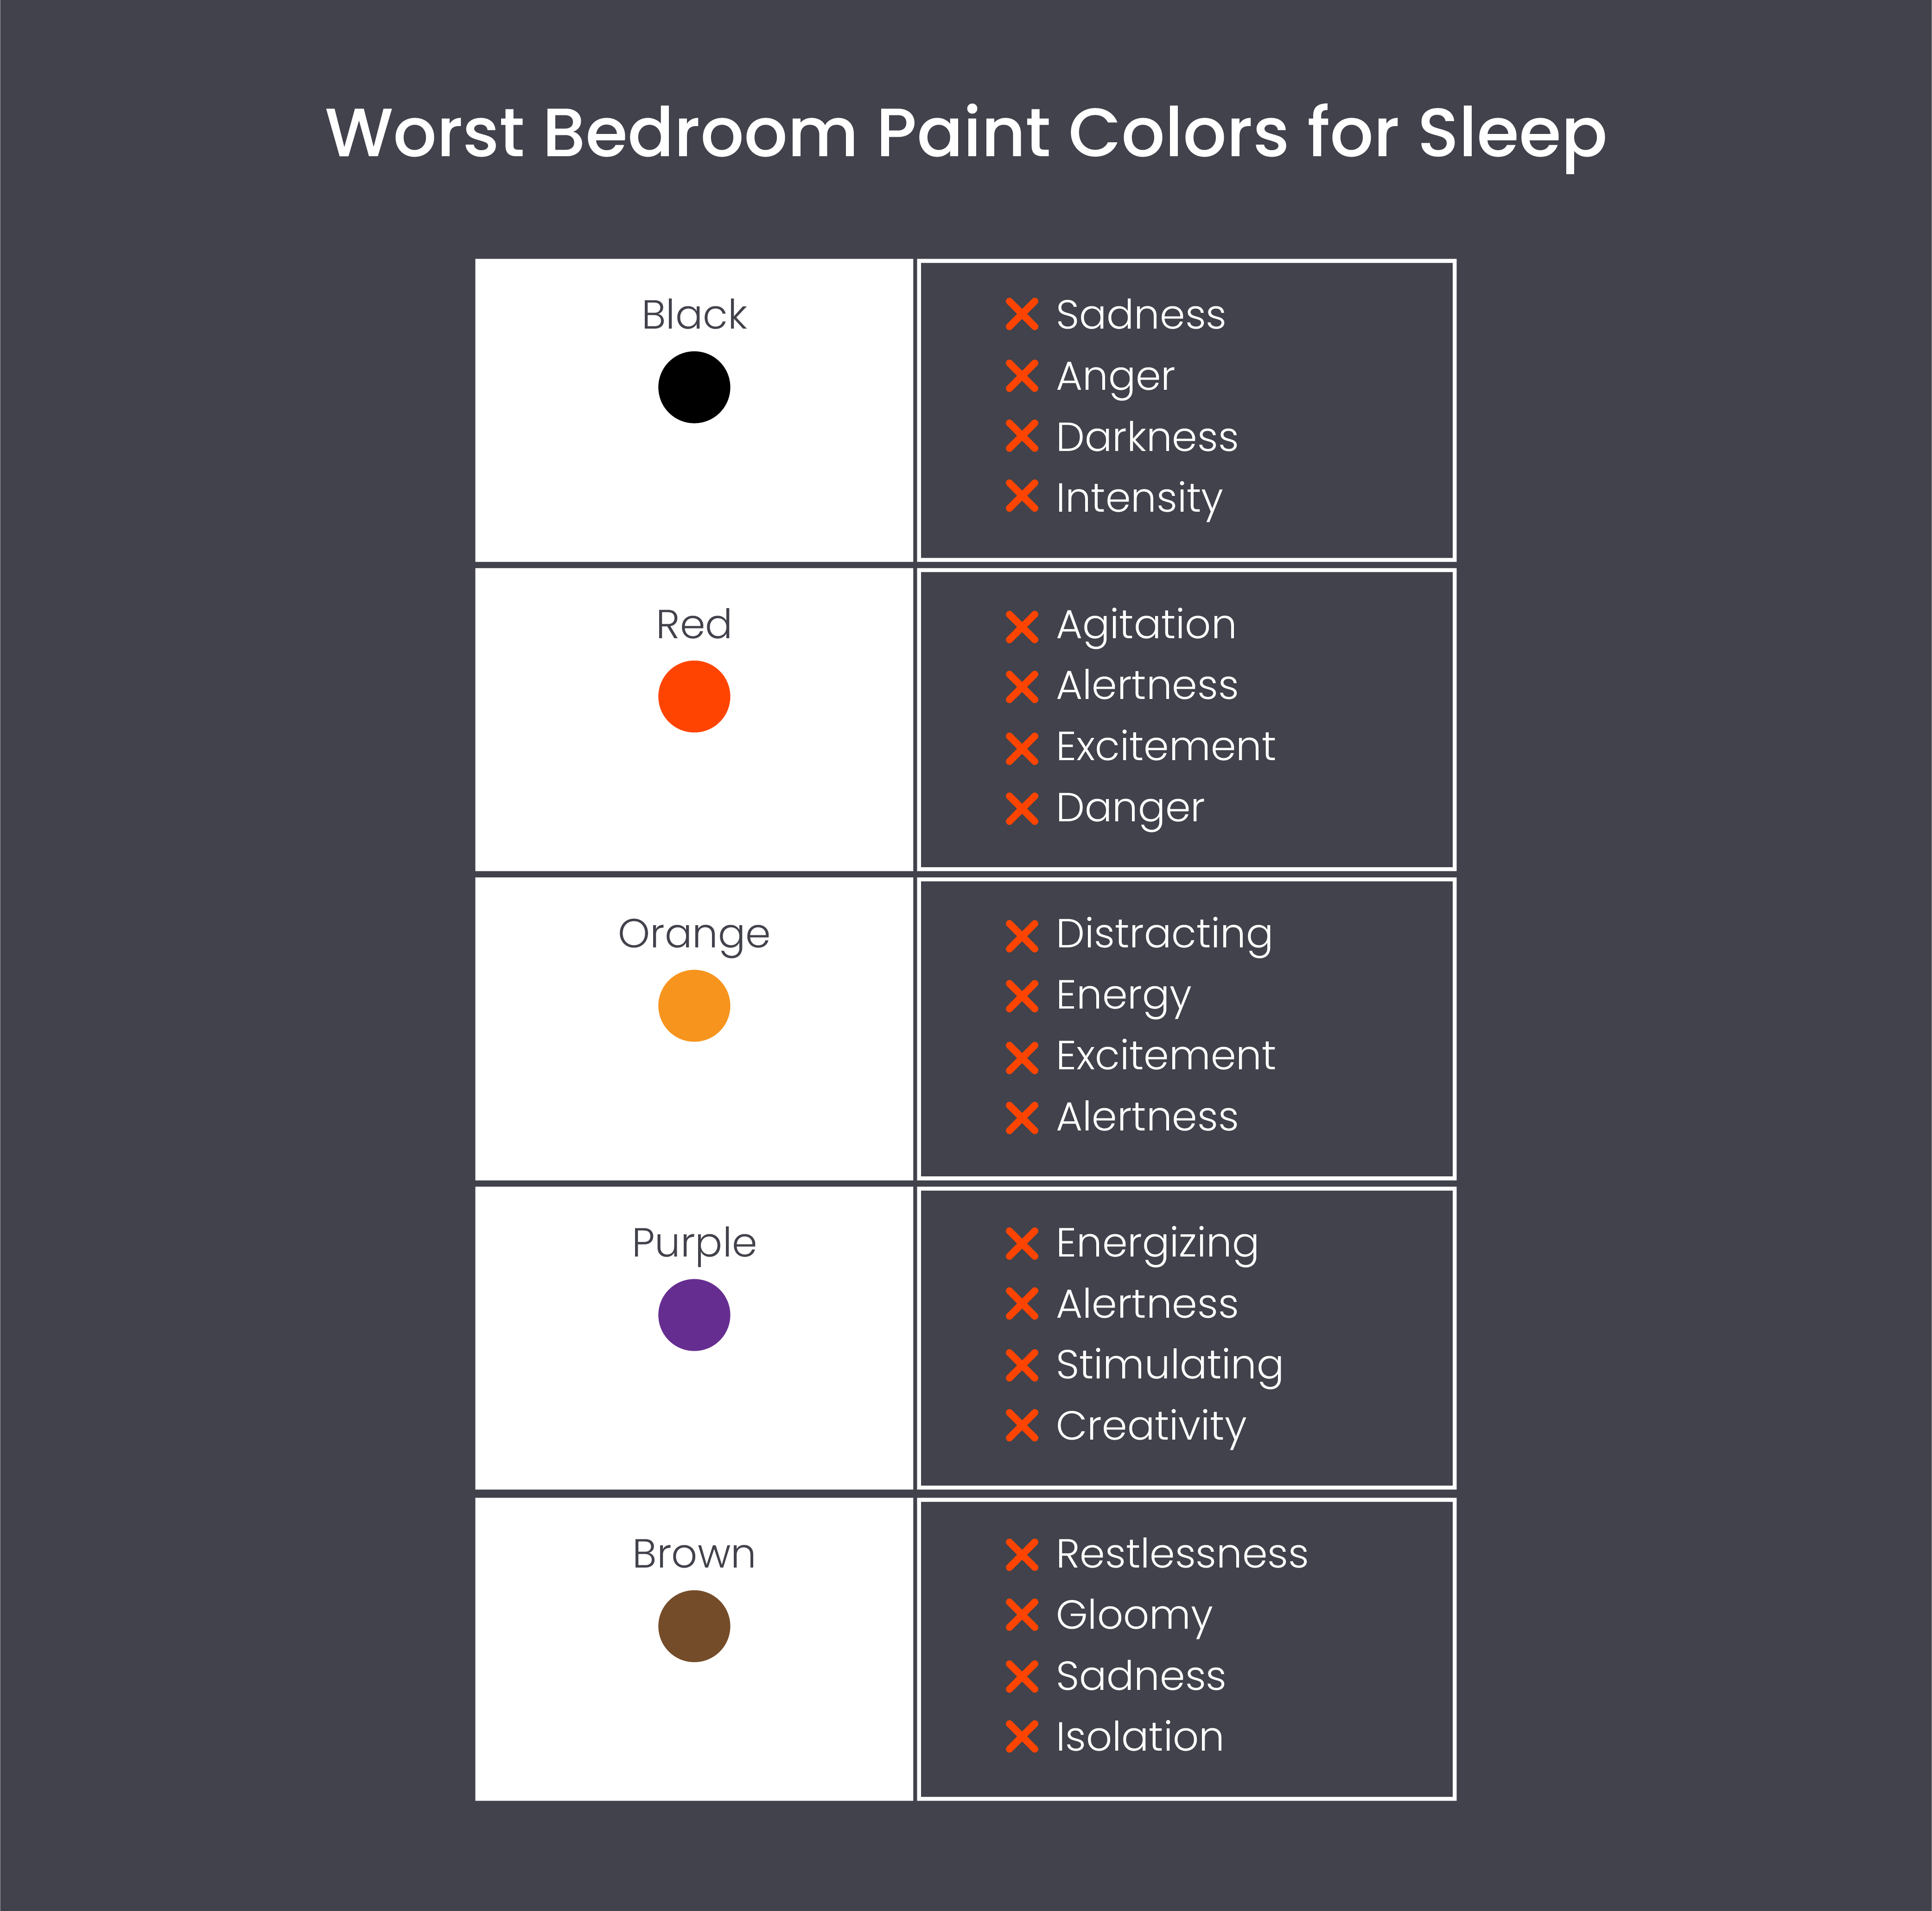 Worst bedroom paint colors for sleep